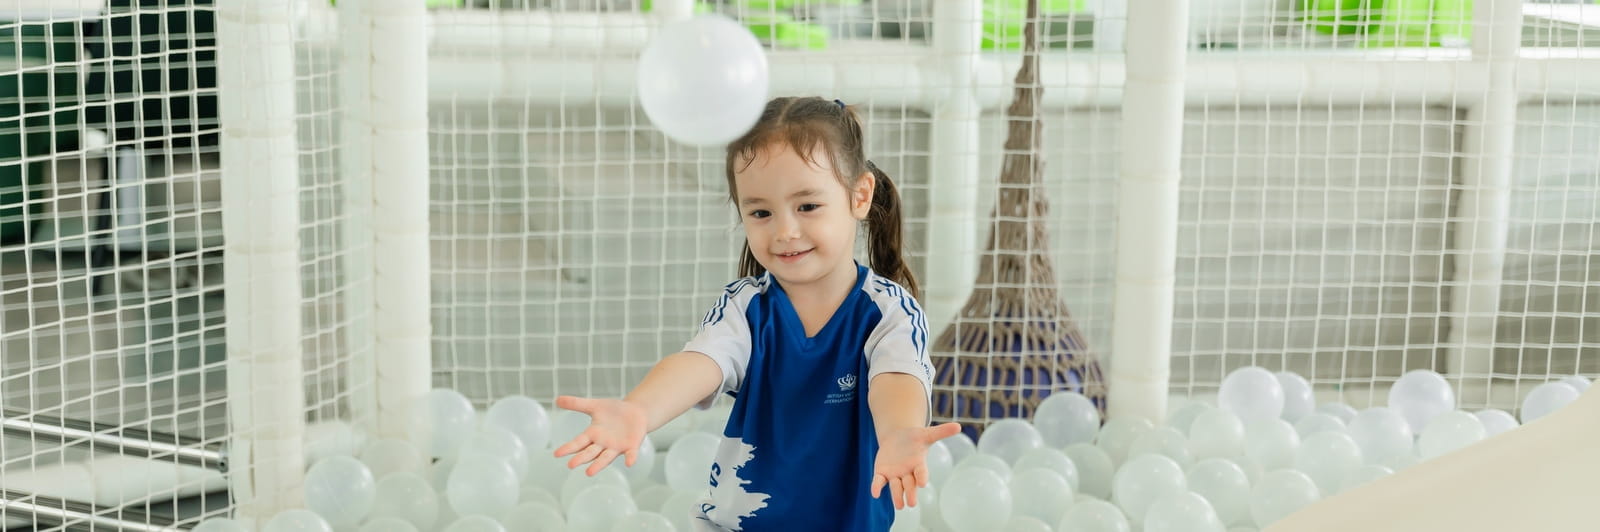 Early Years School in HCMC | BVIS HCMC  - Content Page Header